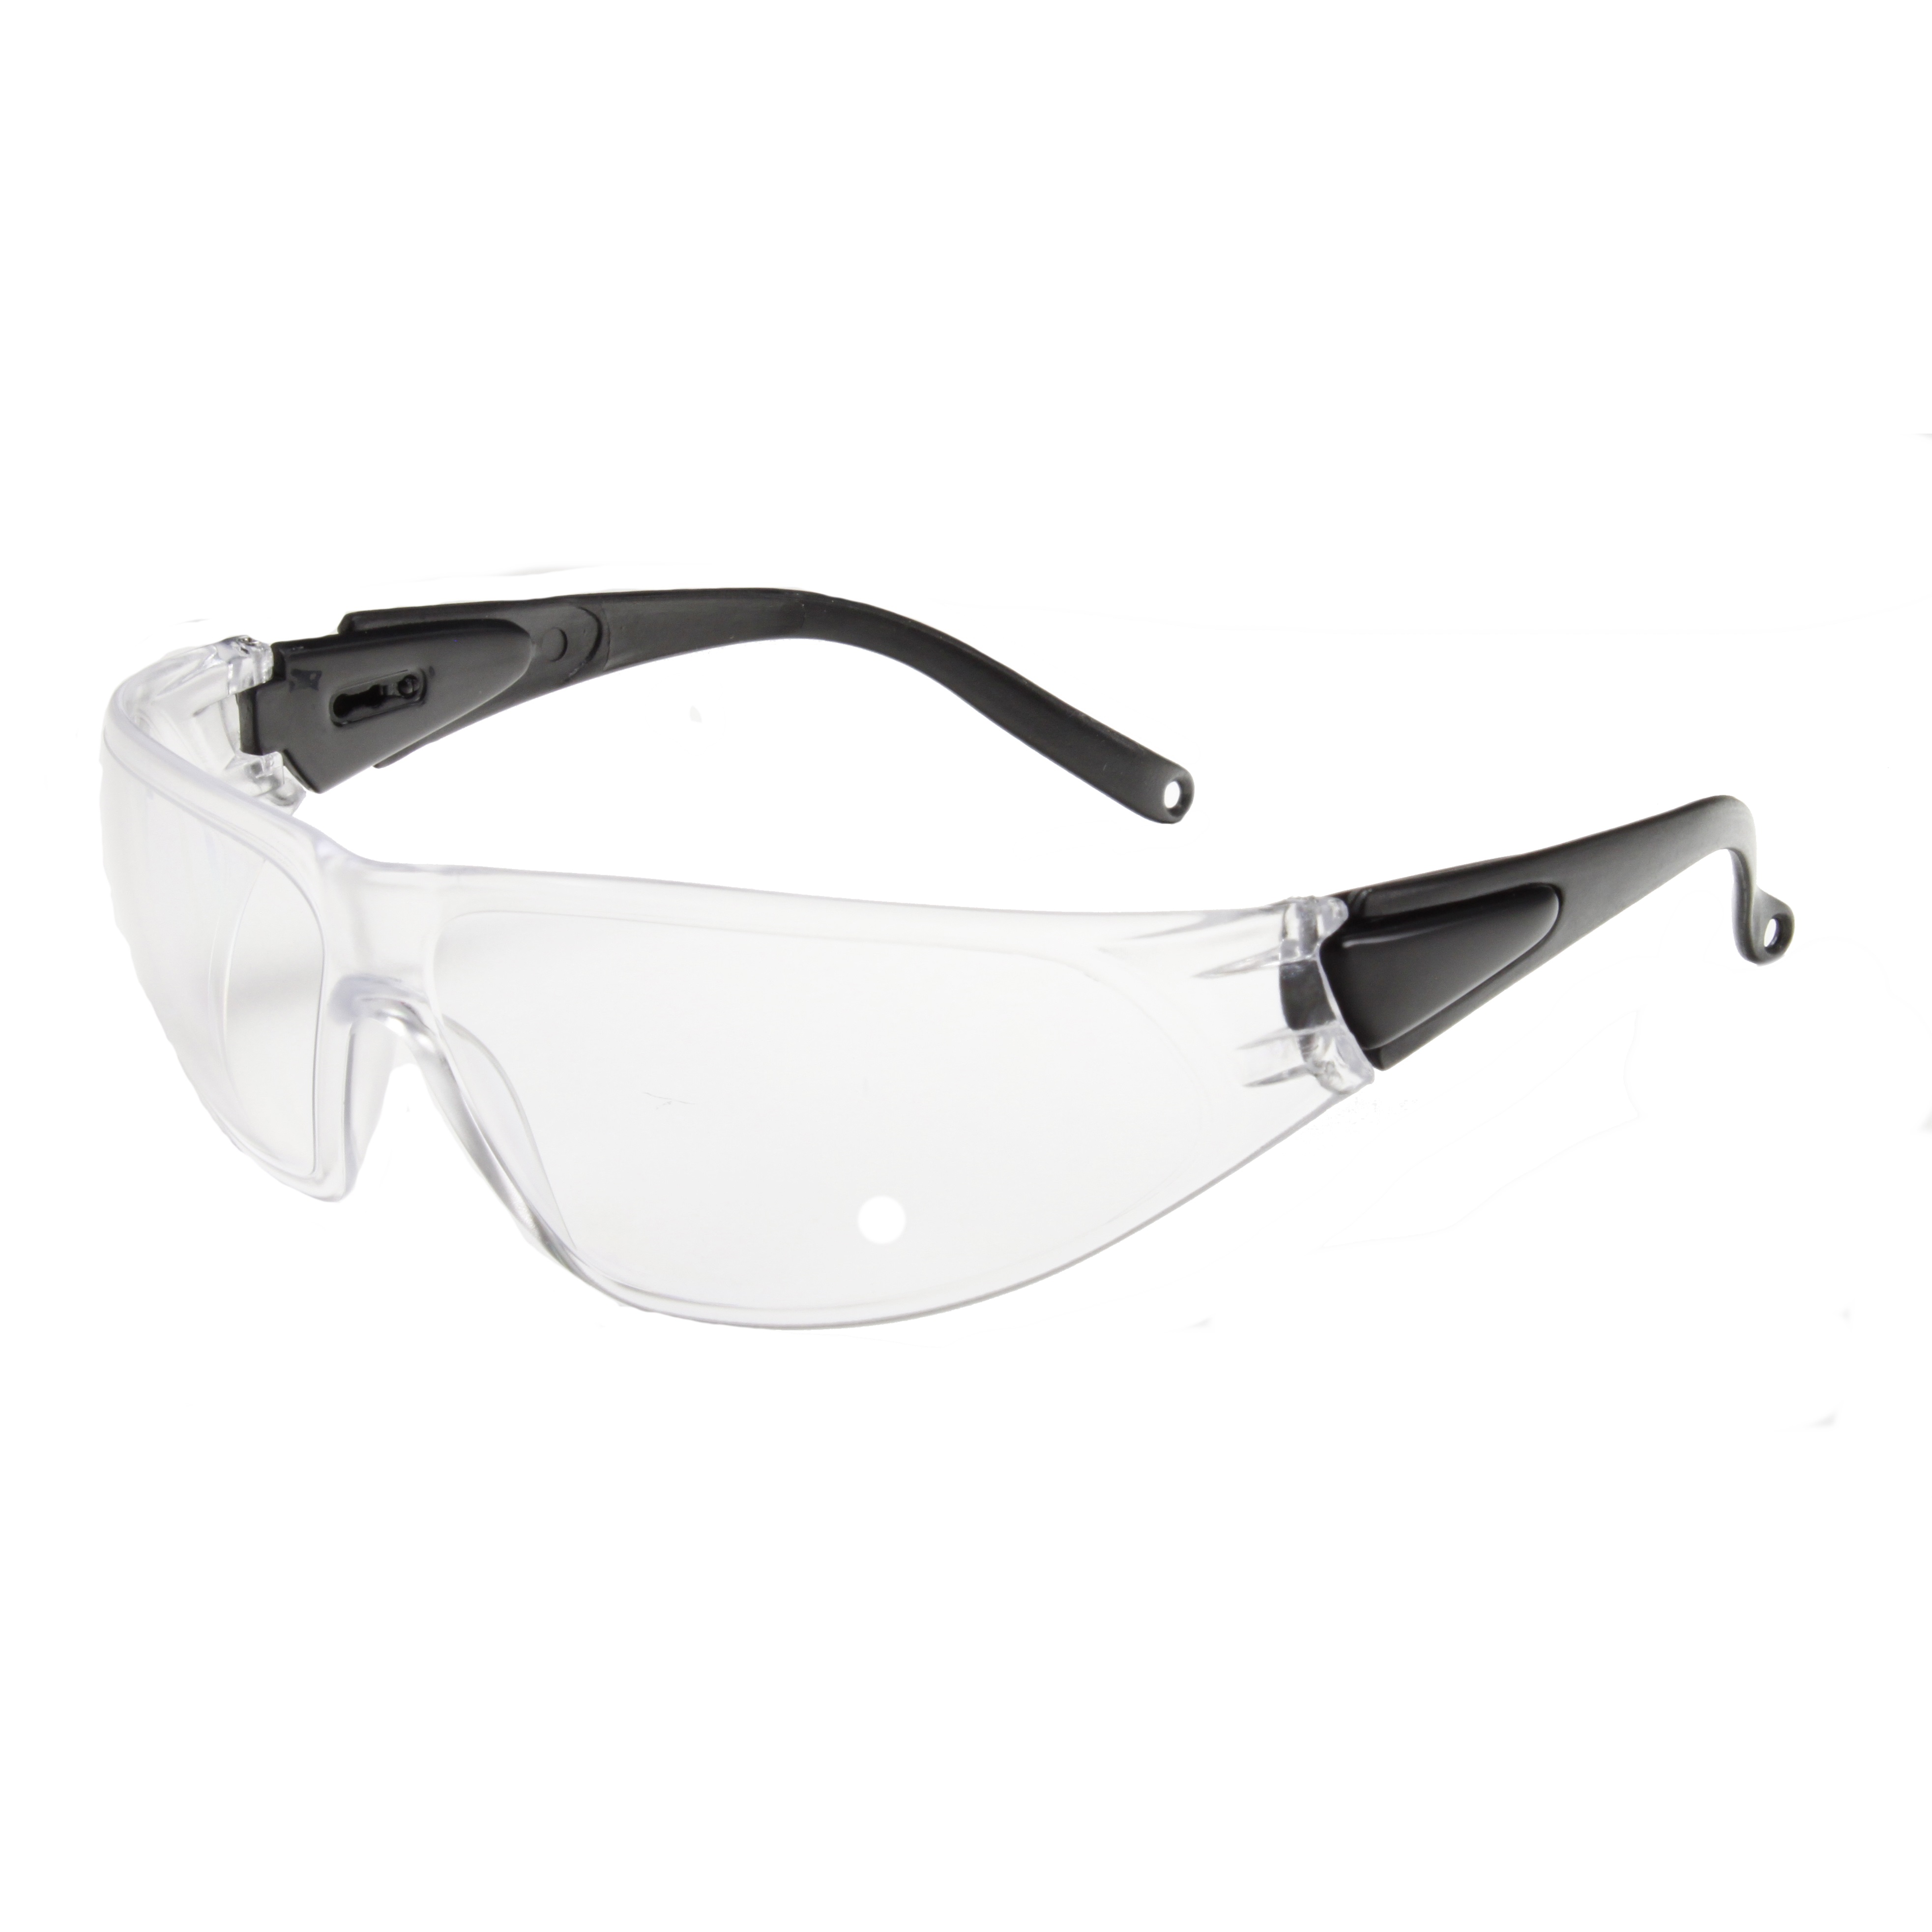 Shield Safety Glasses, Fog Free Clear Lens